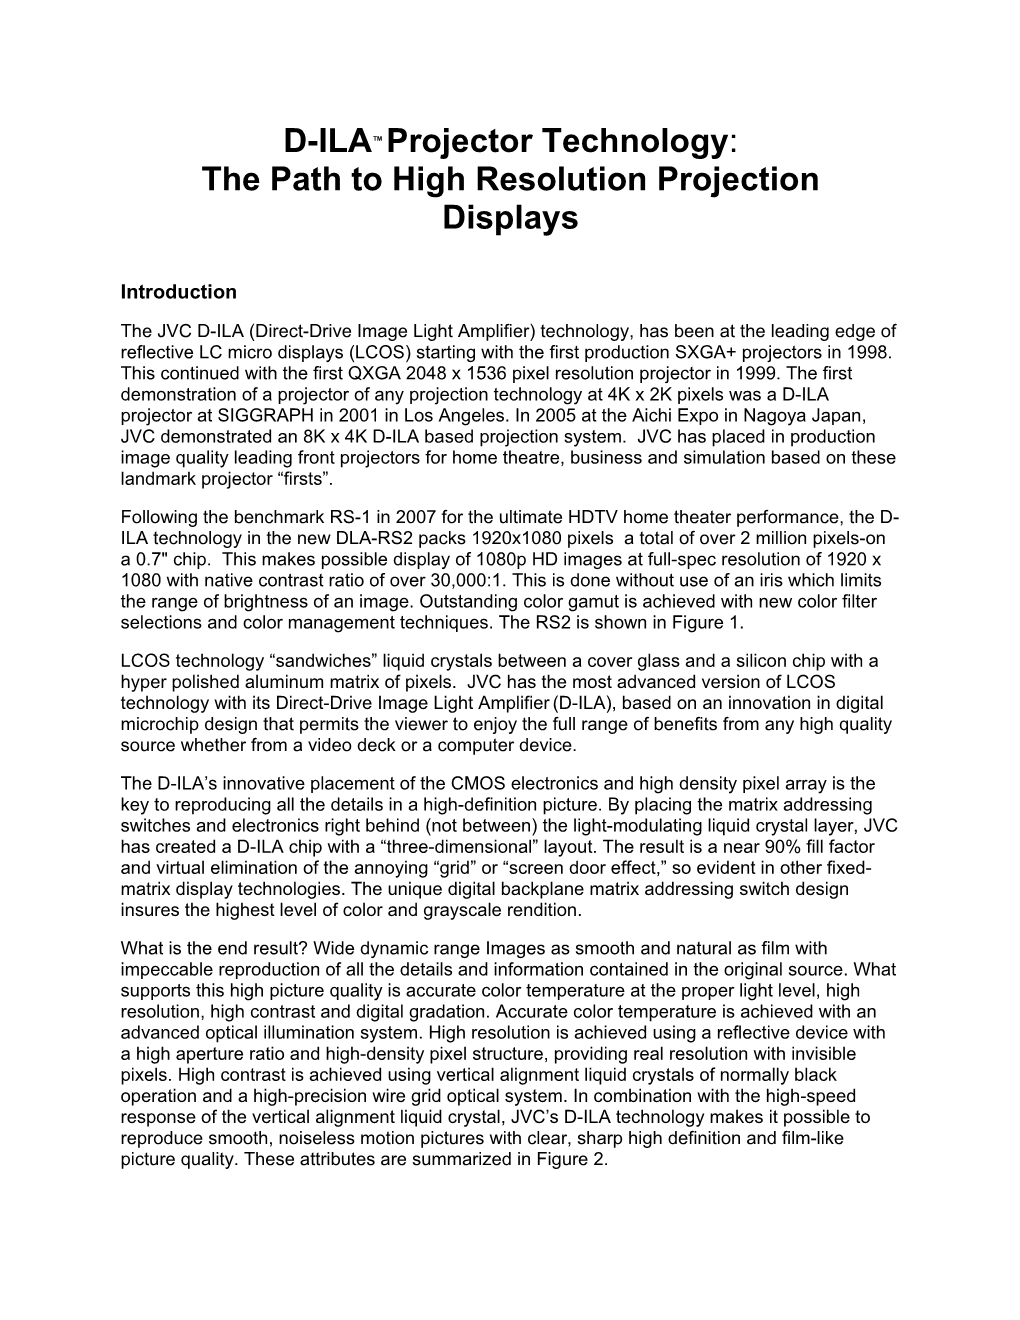 D-ILA™ Projector Technology: the Path to High Resolution Projection Displays